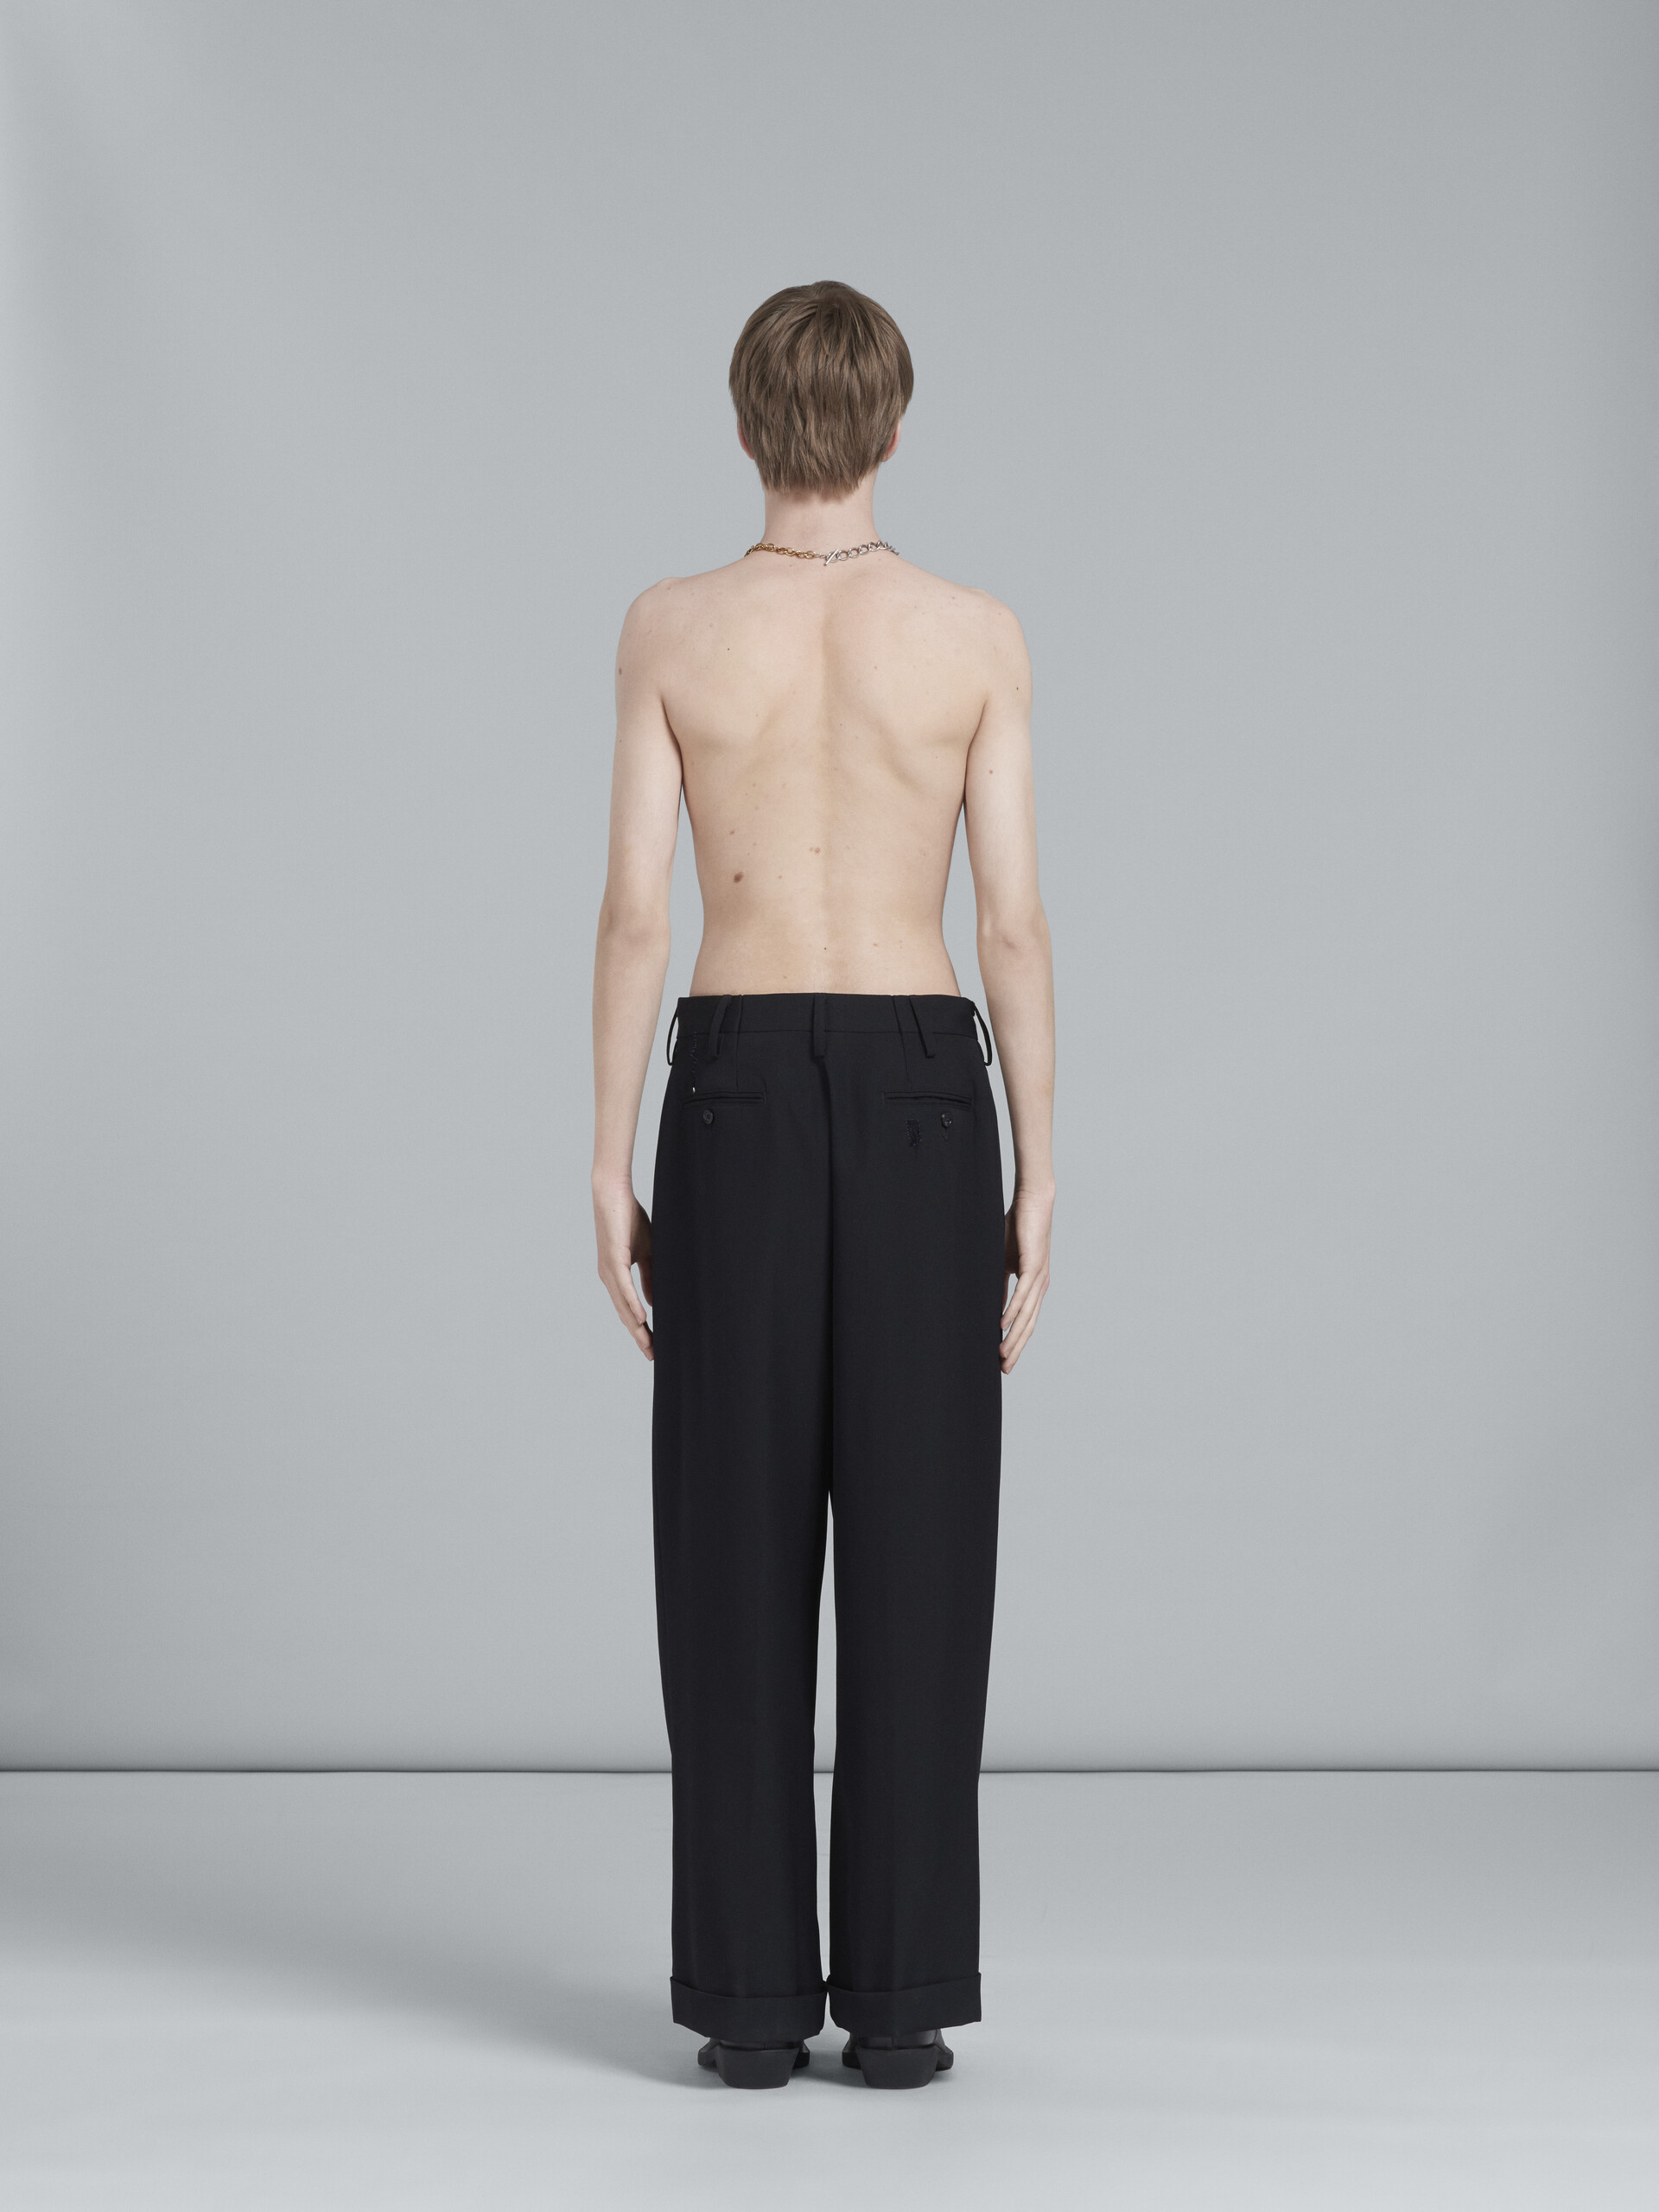 Black tuxedo-style pants with embroidery - Pants - Image 3